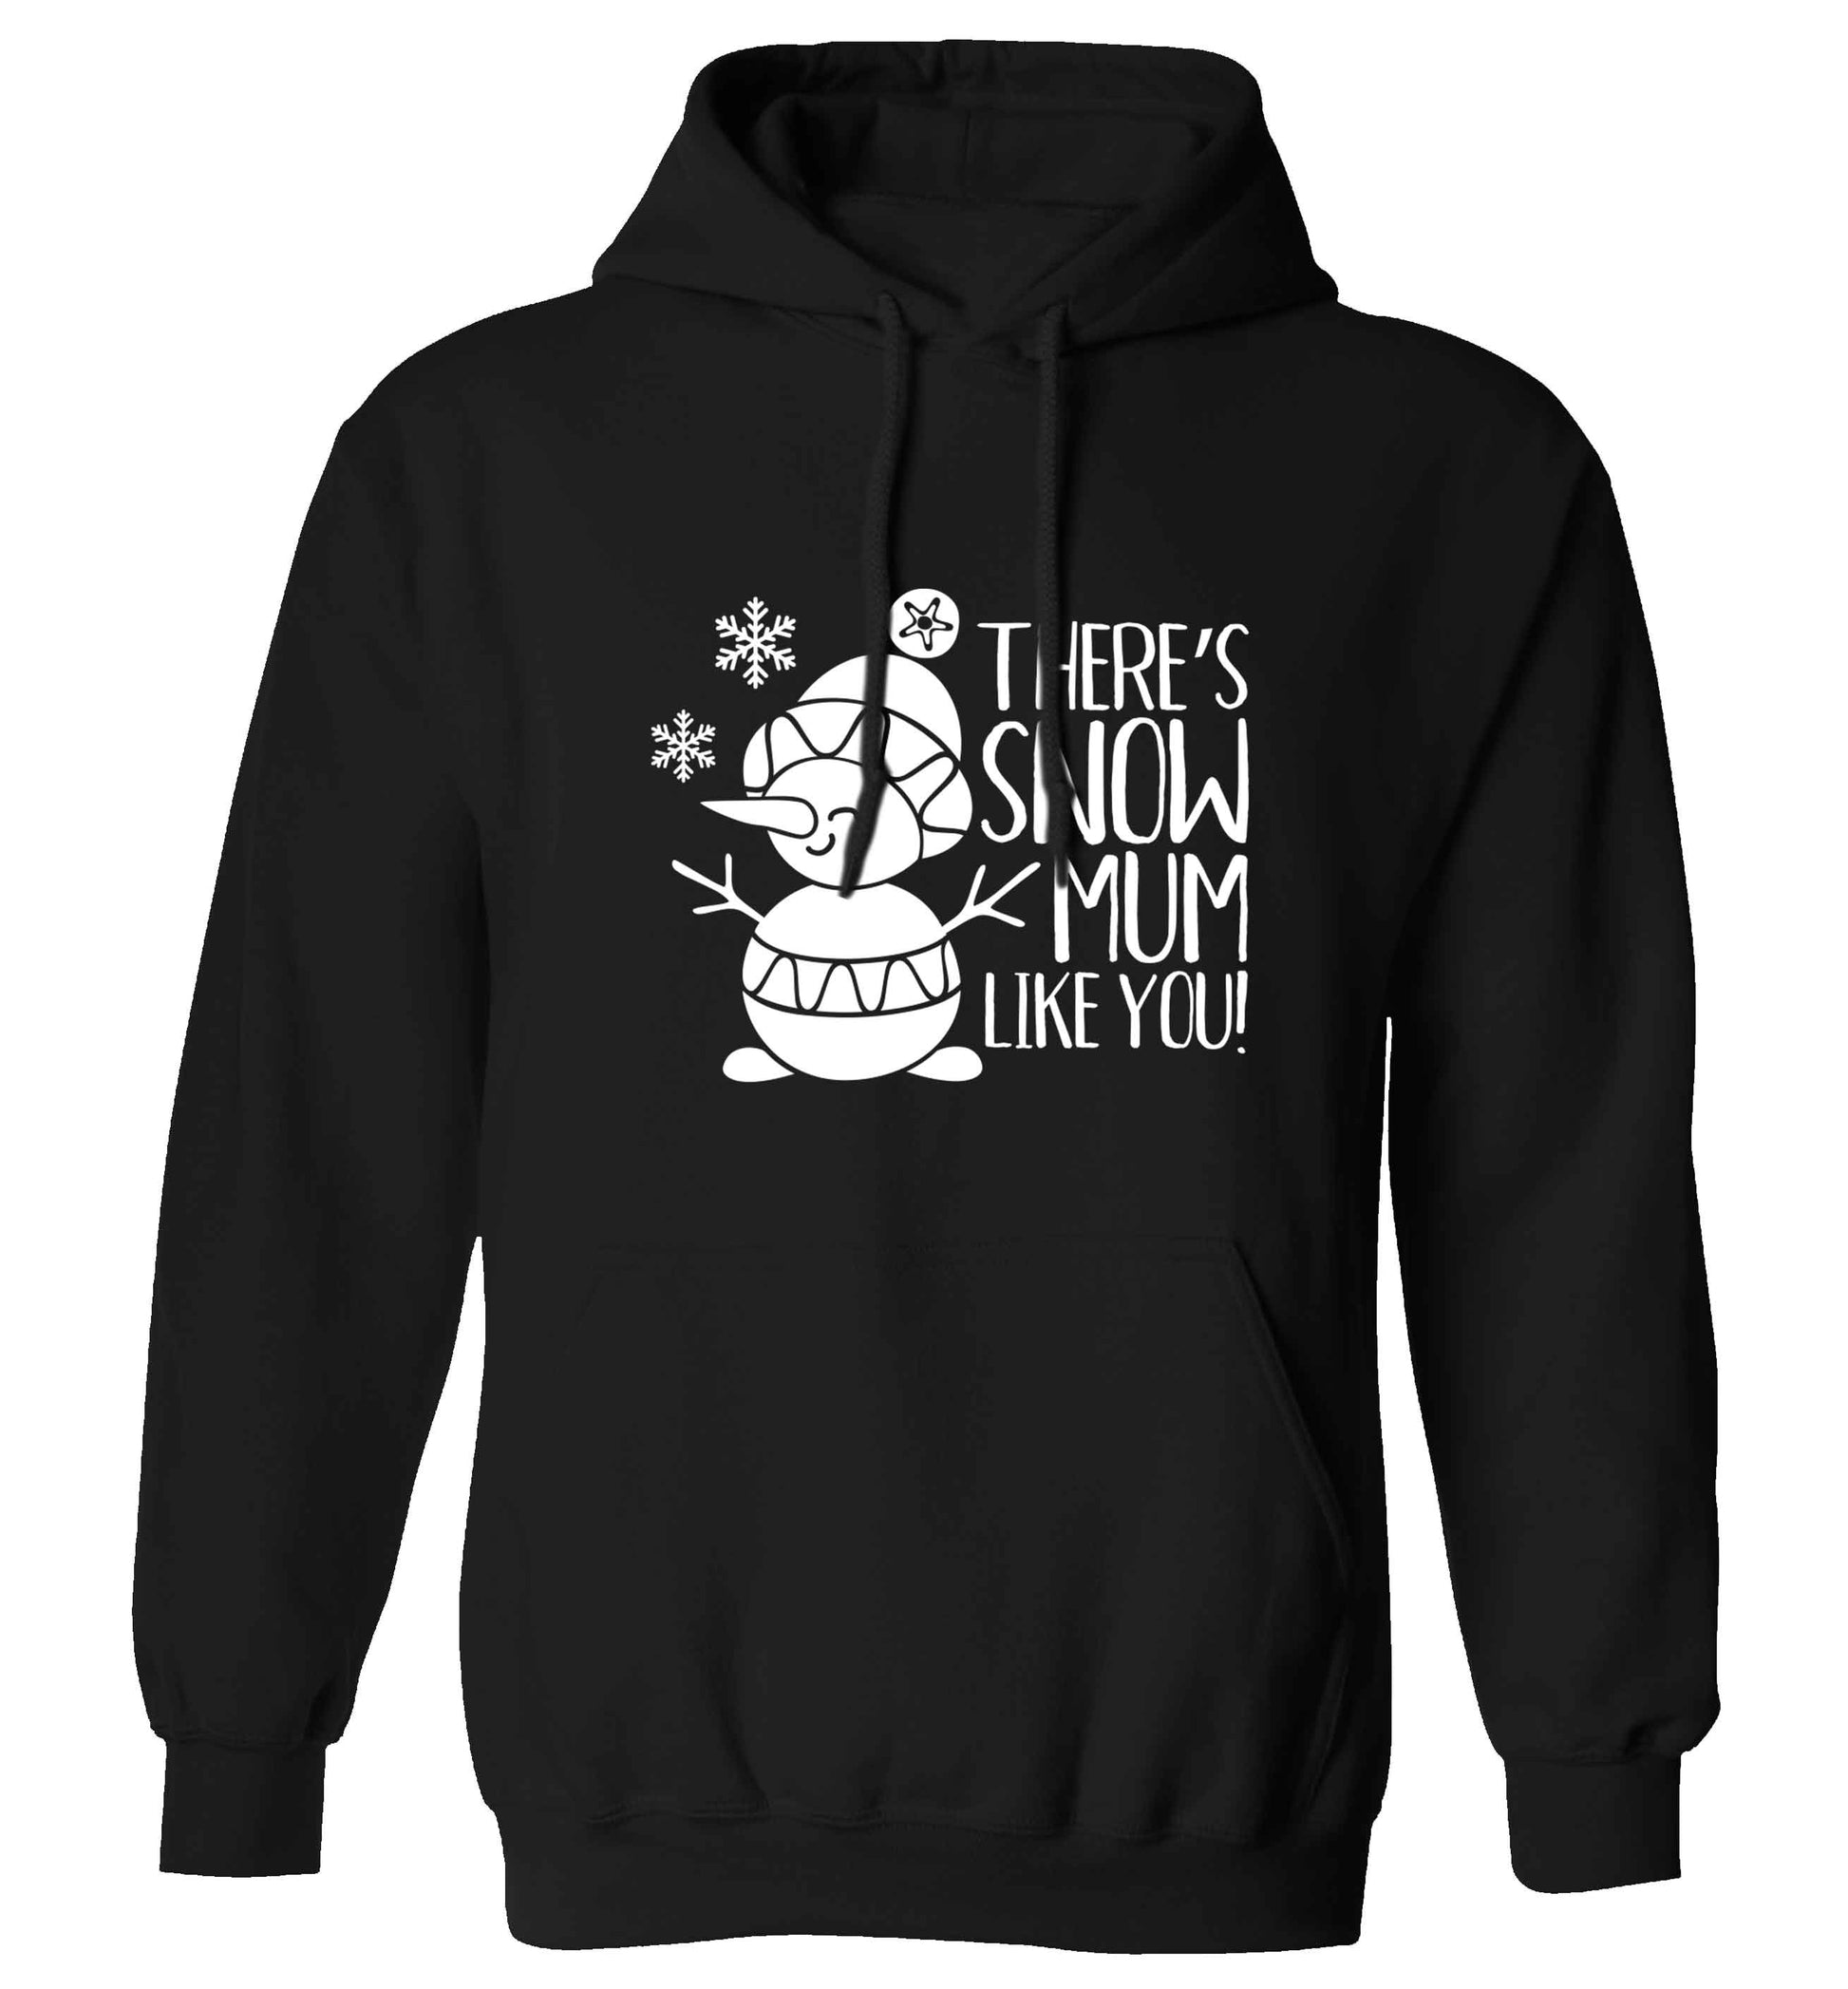 There's snow mum like you adults unisex black hoodie 2XL